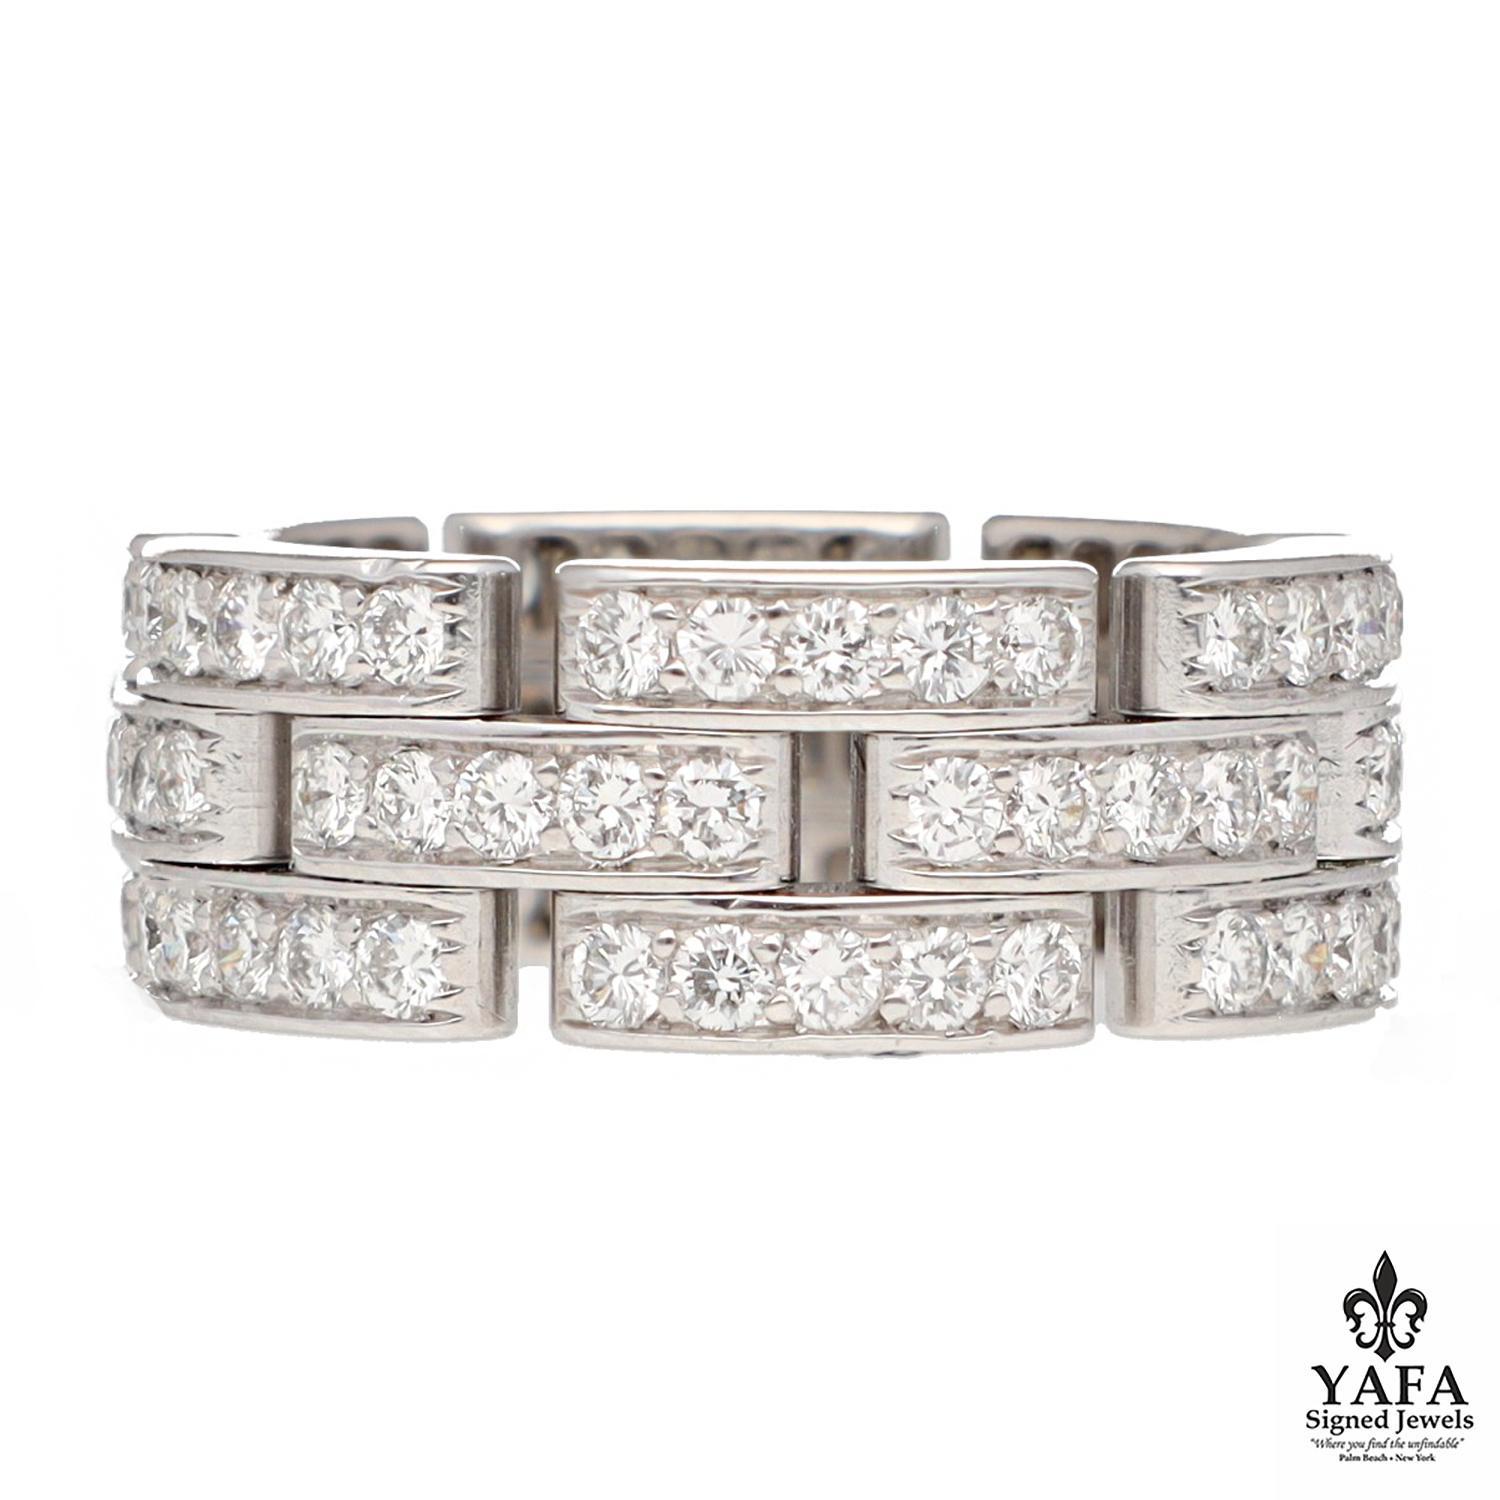 Cartier 18K white gold and diamond 3-row panther link ring is know for its luxury and elegance. This iconic Cartier motif is embellished with sparkling diamonds that reflect its stunning craftsmanship. Size 52, 6 or 16.6mm.
Signed - Cartier